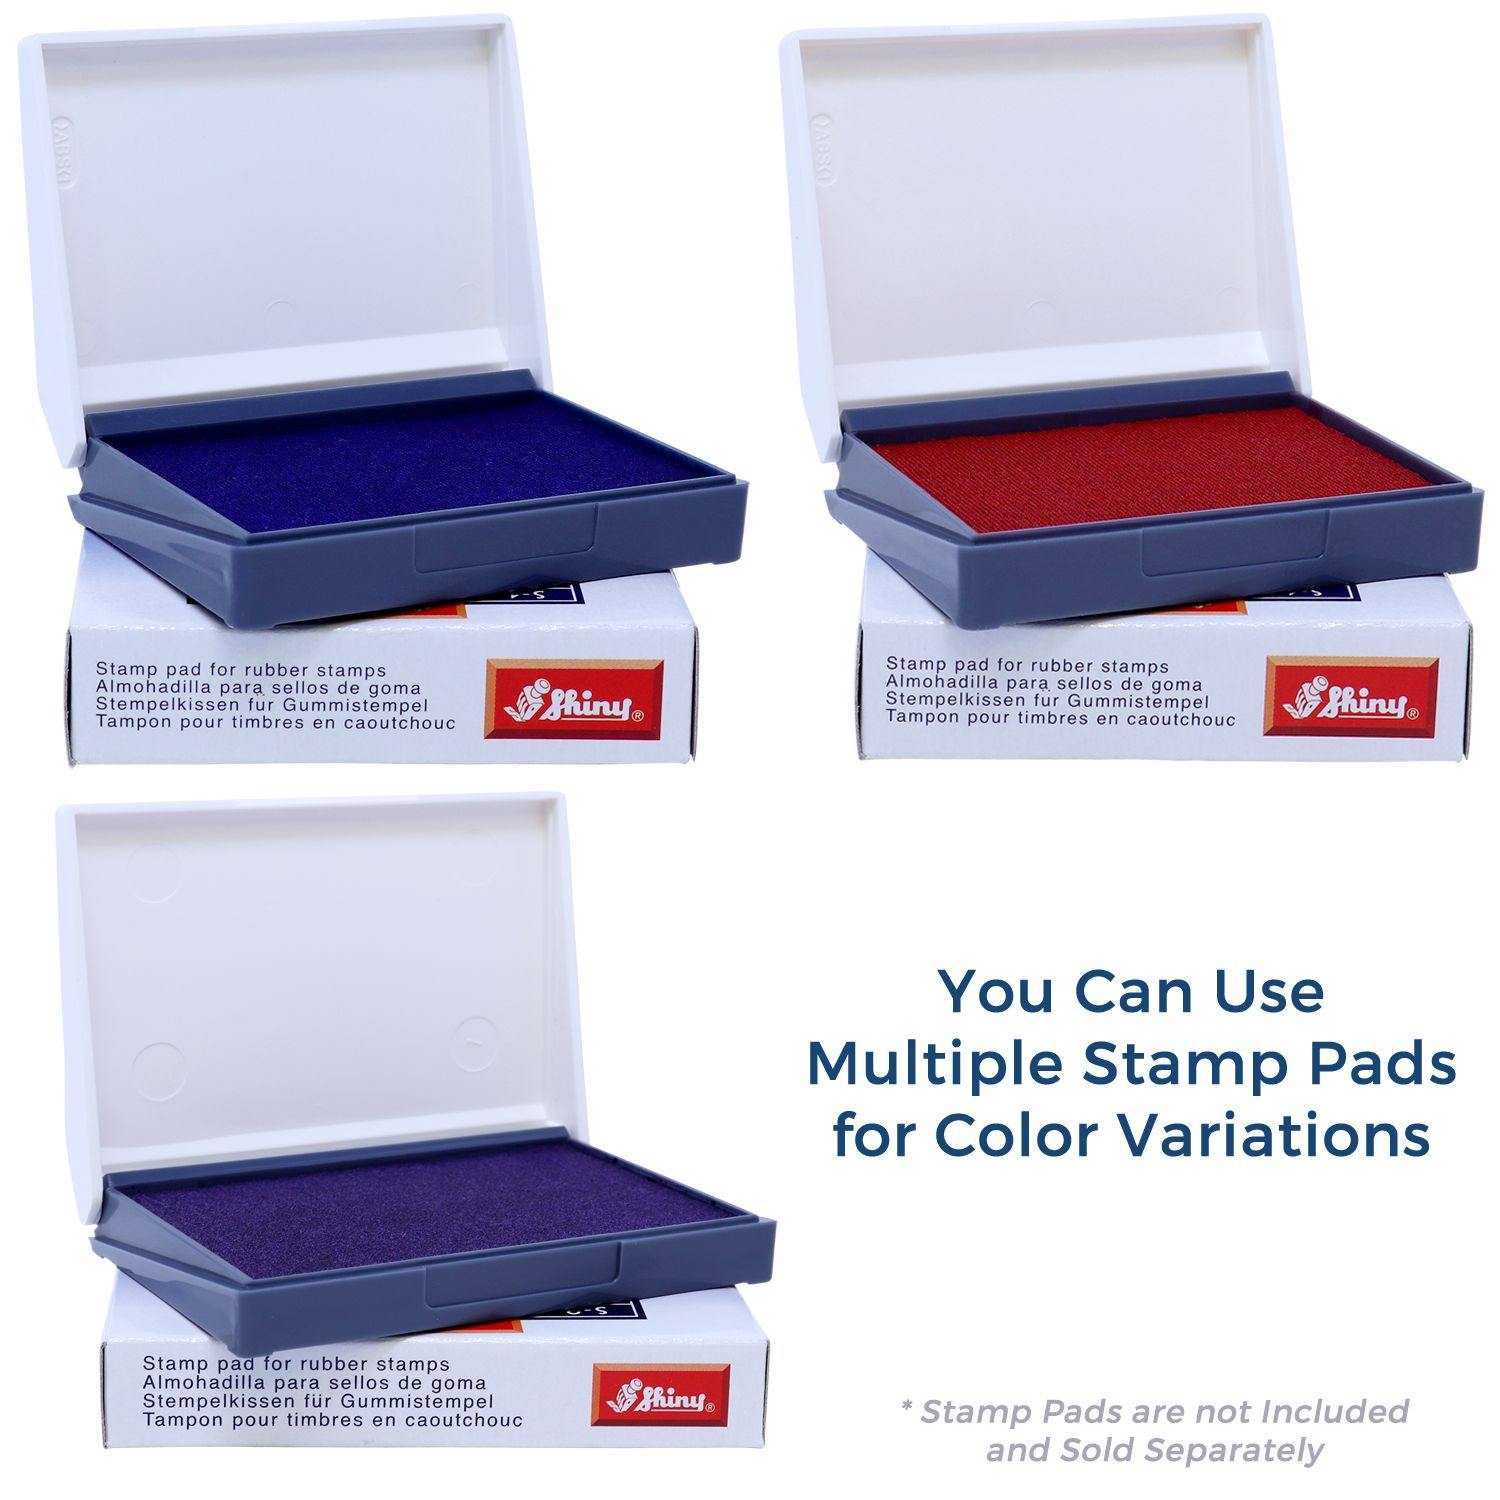 Stamp Pads for Large Non-Smoker Rubber Stamp Available